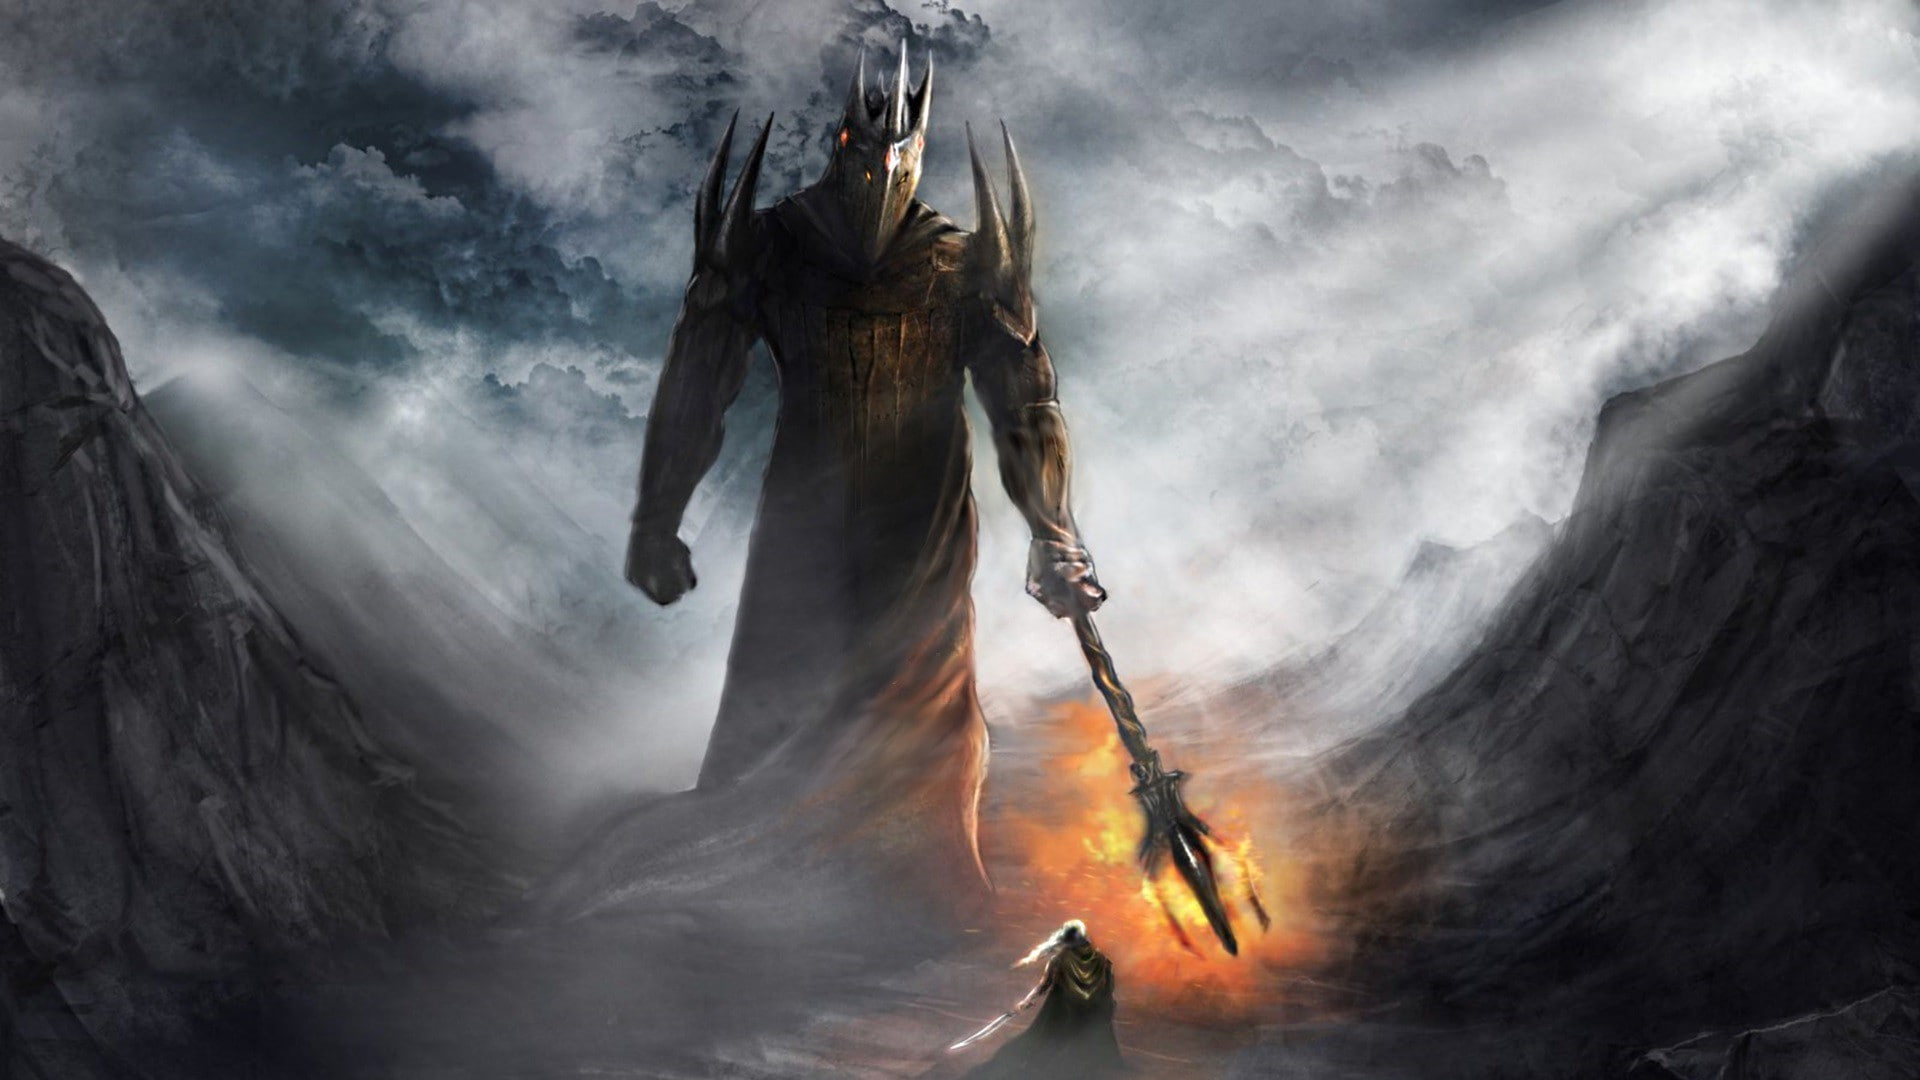 fantasy Art, Morgoth, The Lord Of The Rings